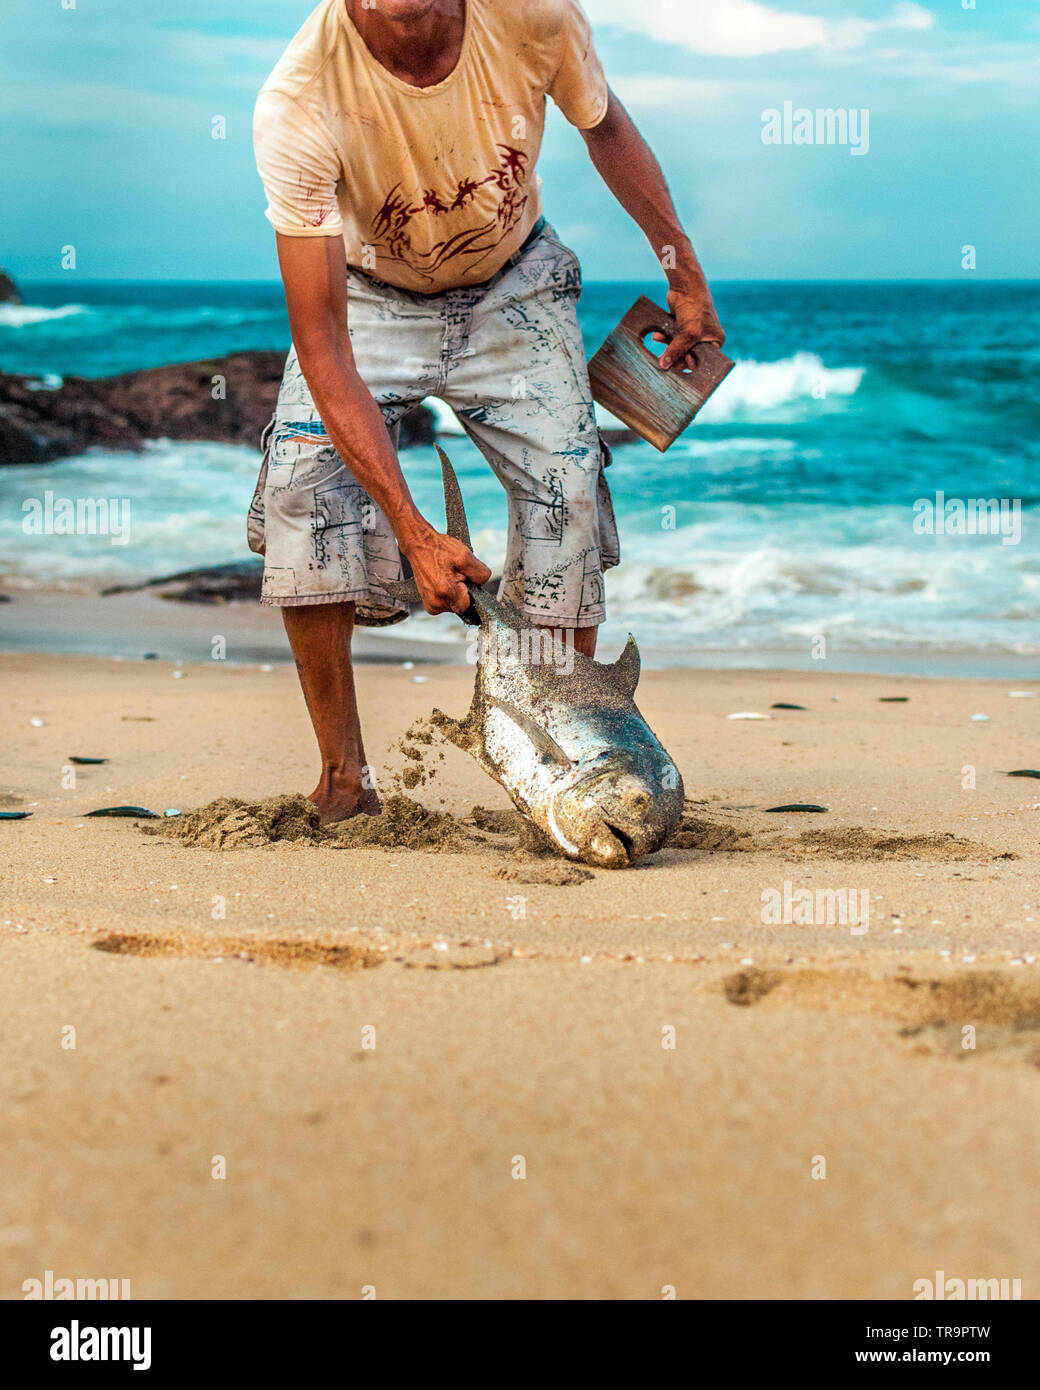 Fisherman carrying their catch of the day after fishing from the beach,  small scale fishing with fishing line, hooks and bare hands Stock Photo -  Alamy